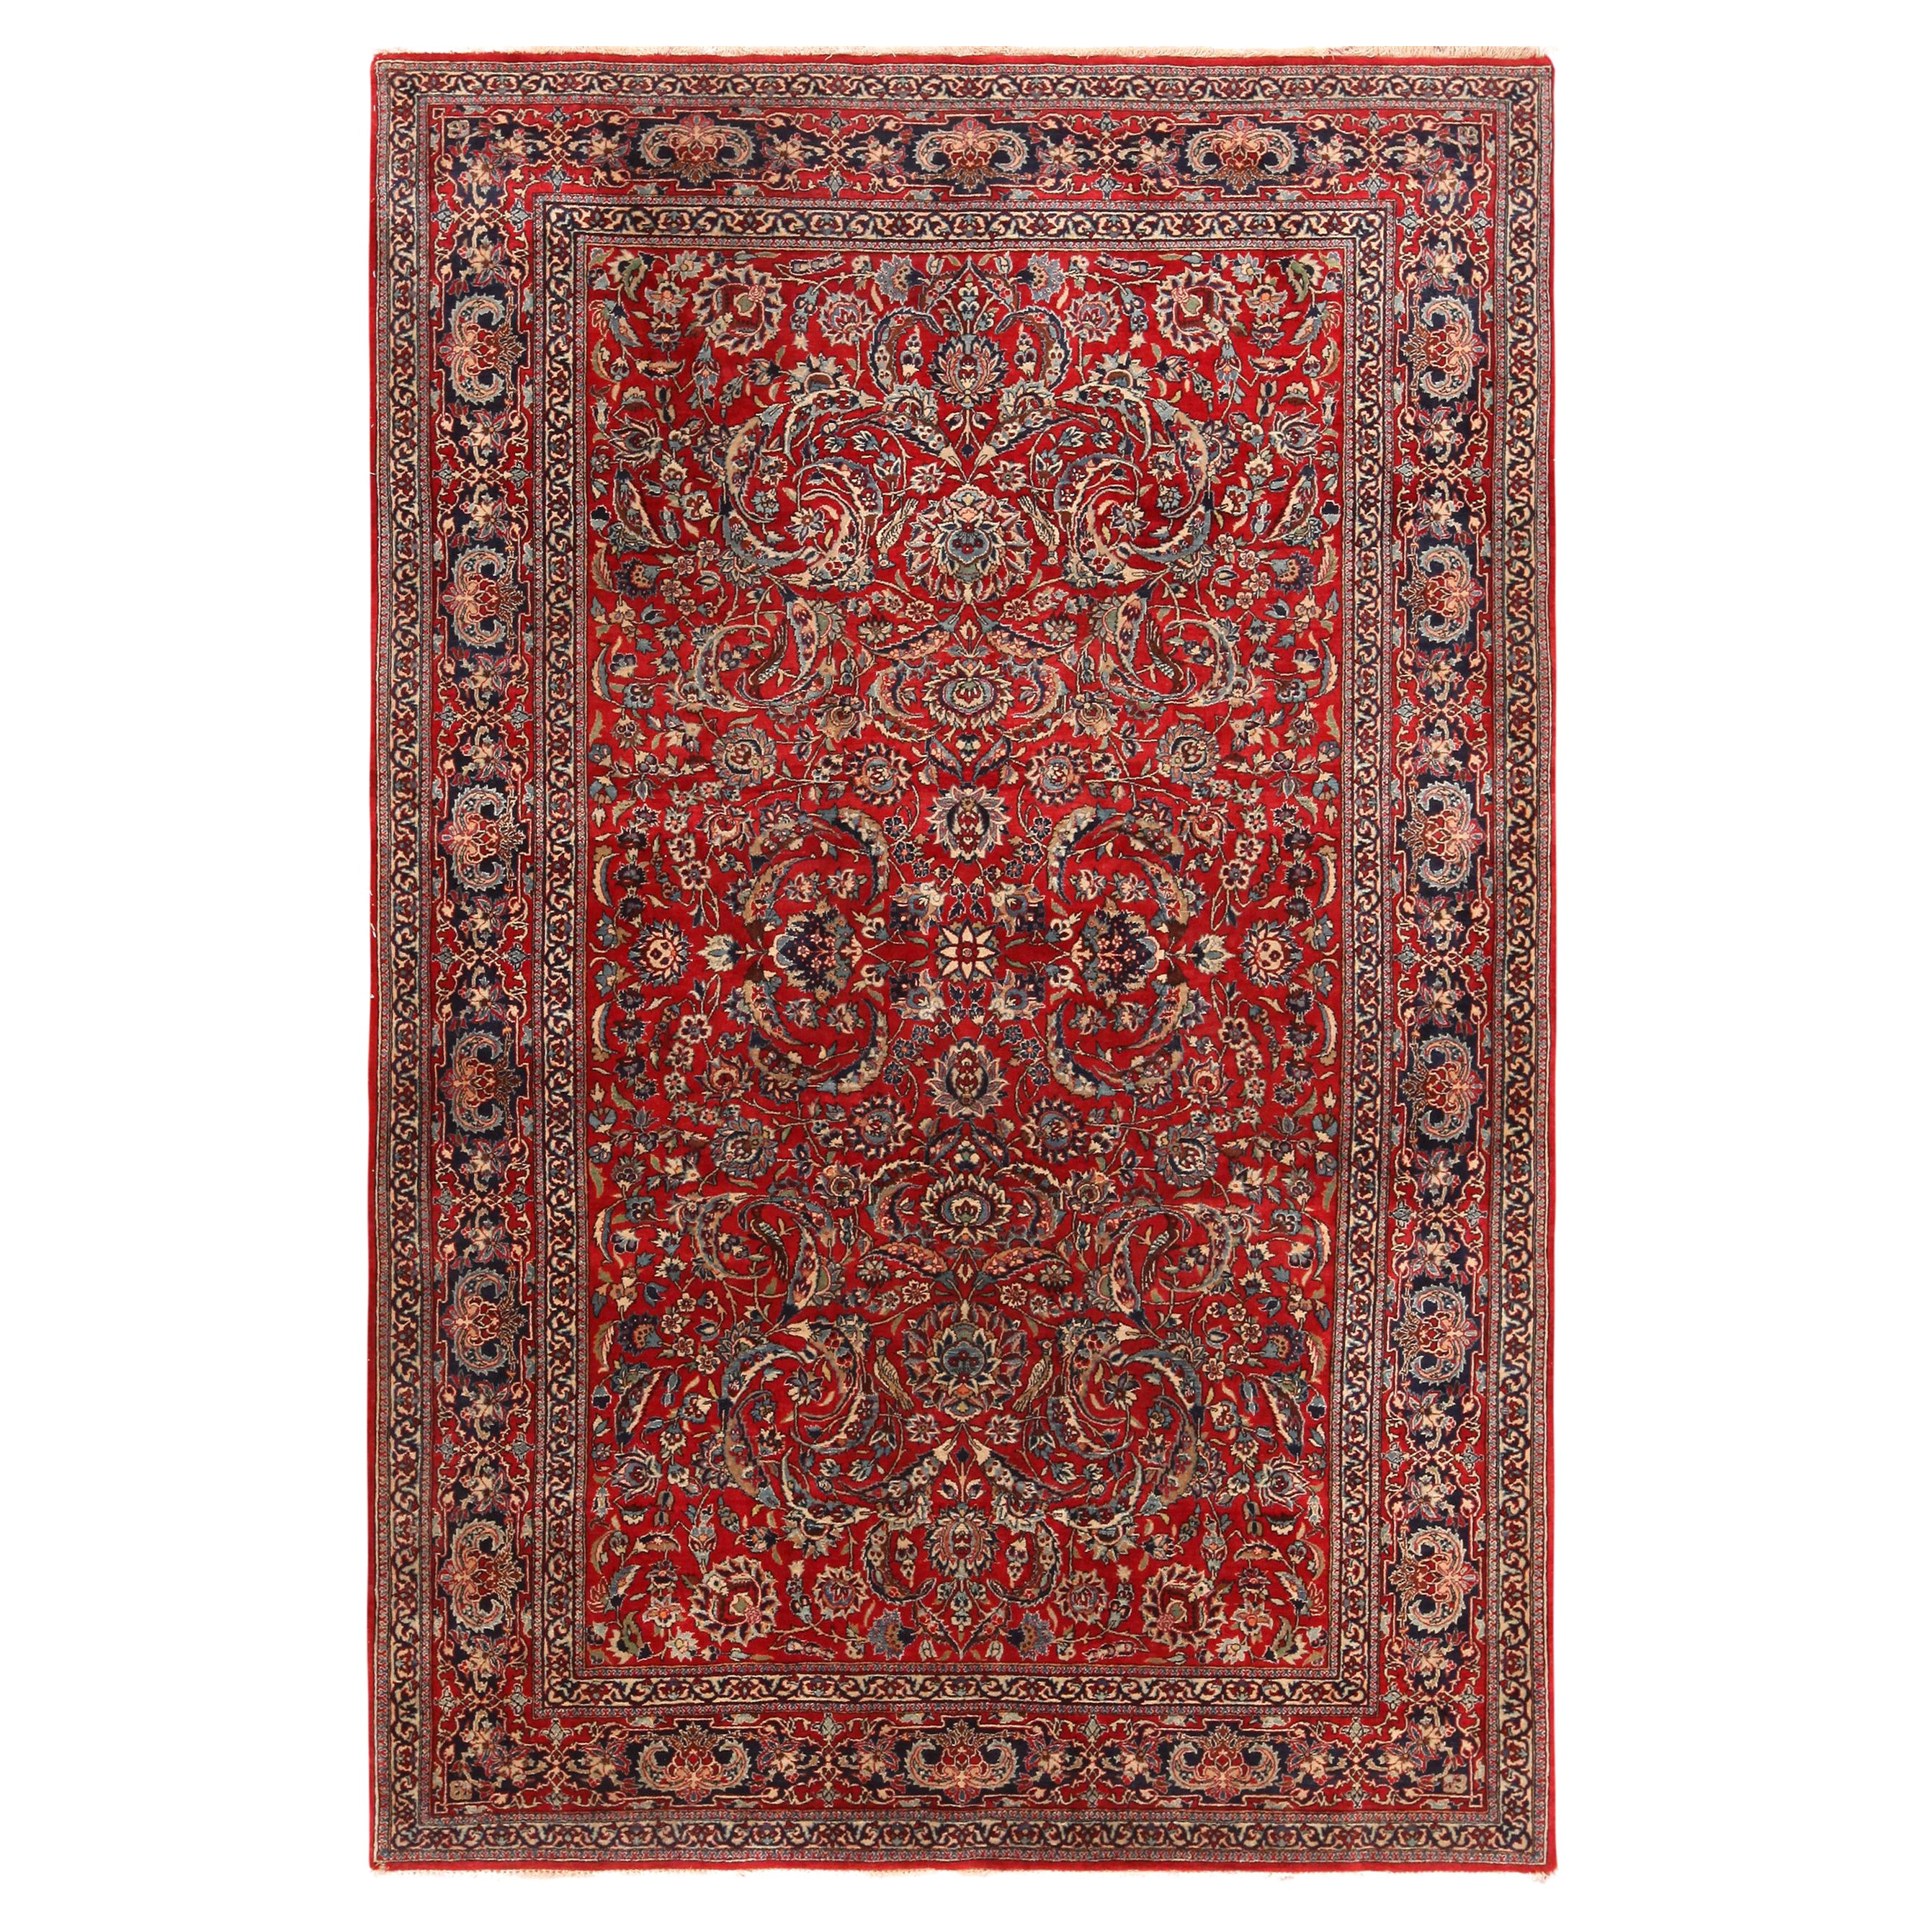 Nazmiyal Collection Antique Persian Isfahan Rug. 4 ft 9 in x 7 ft 2 in